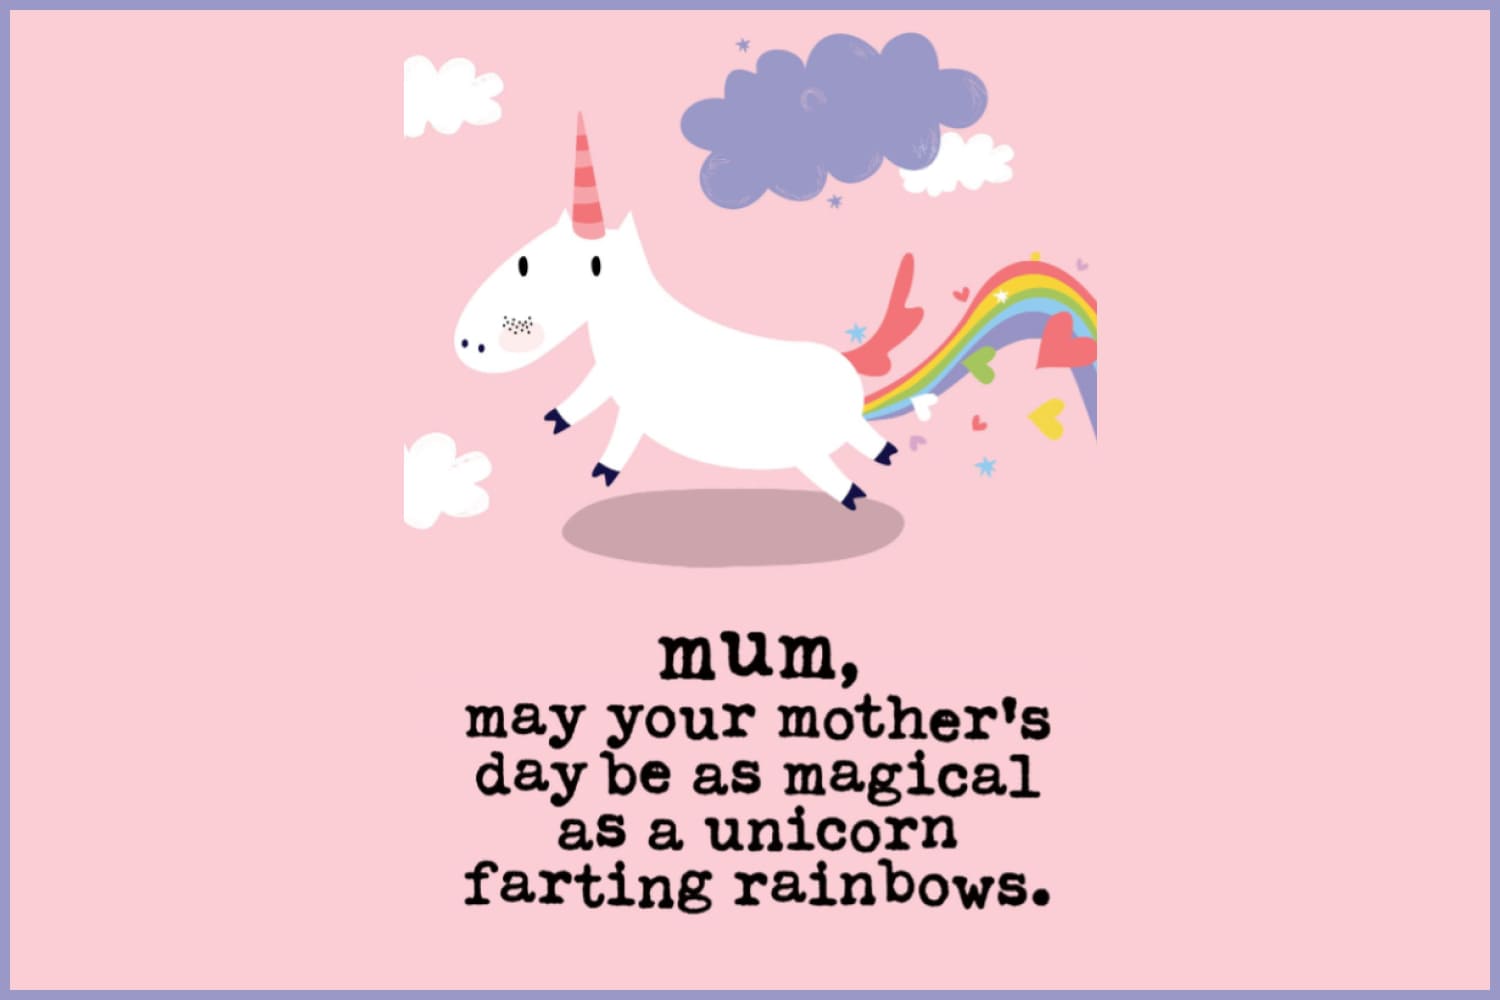 Image of white cute unicorn with cute text.